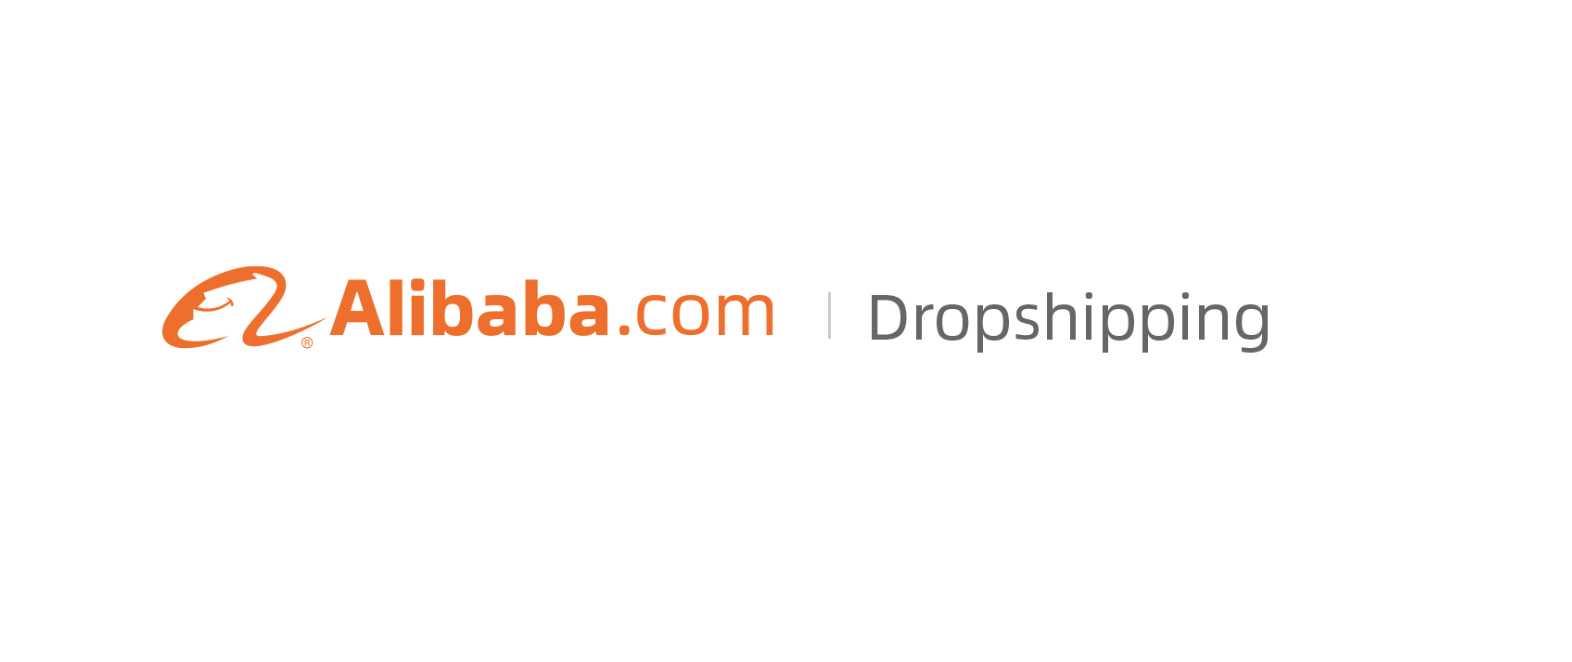 Getting Started with Alibaba Dropshipping